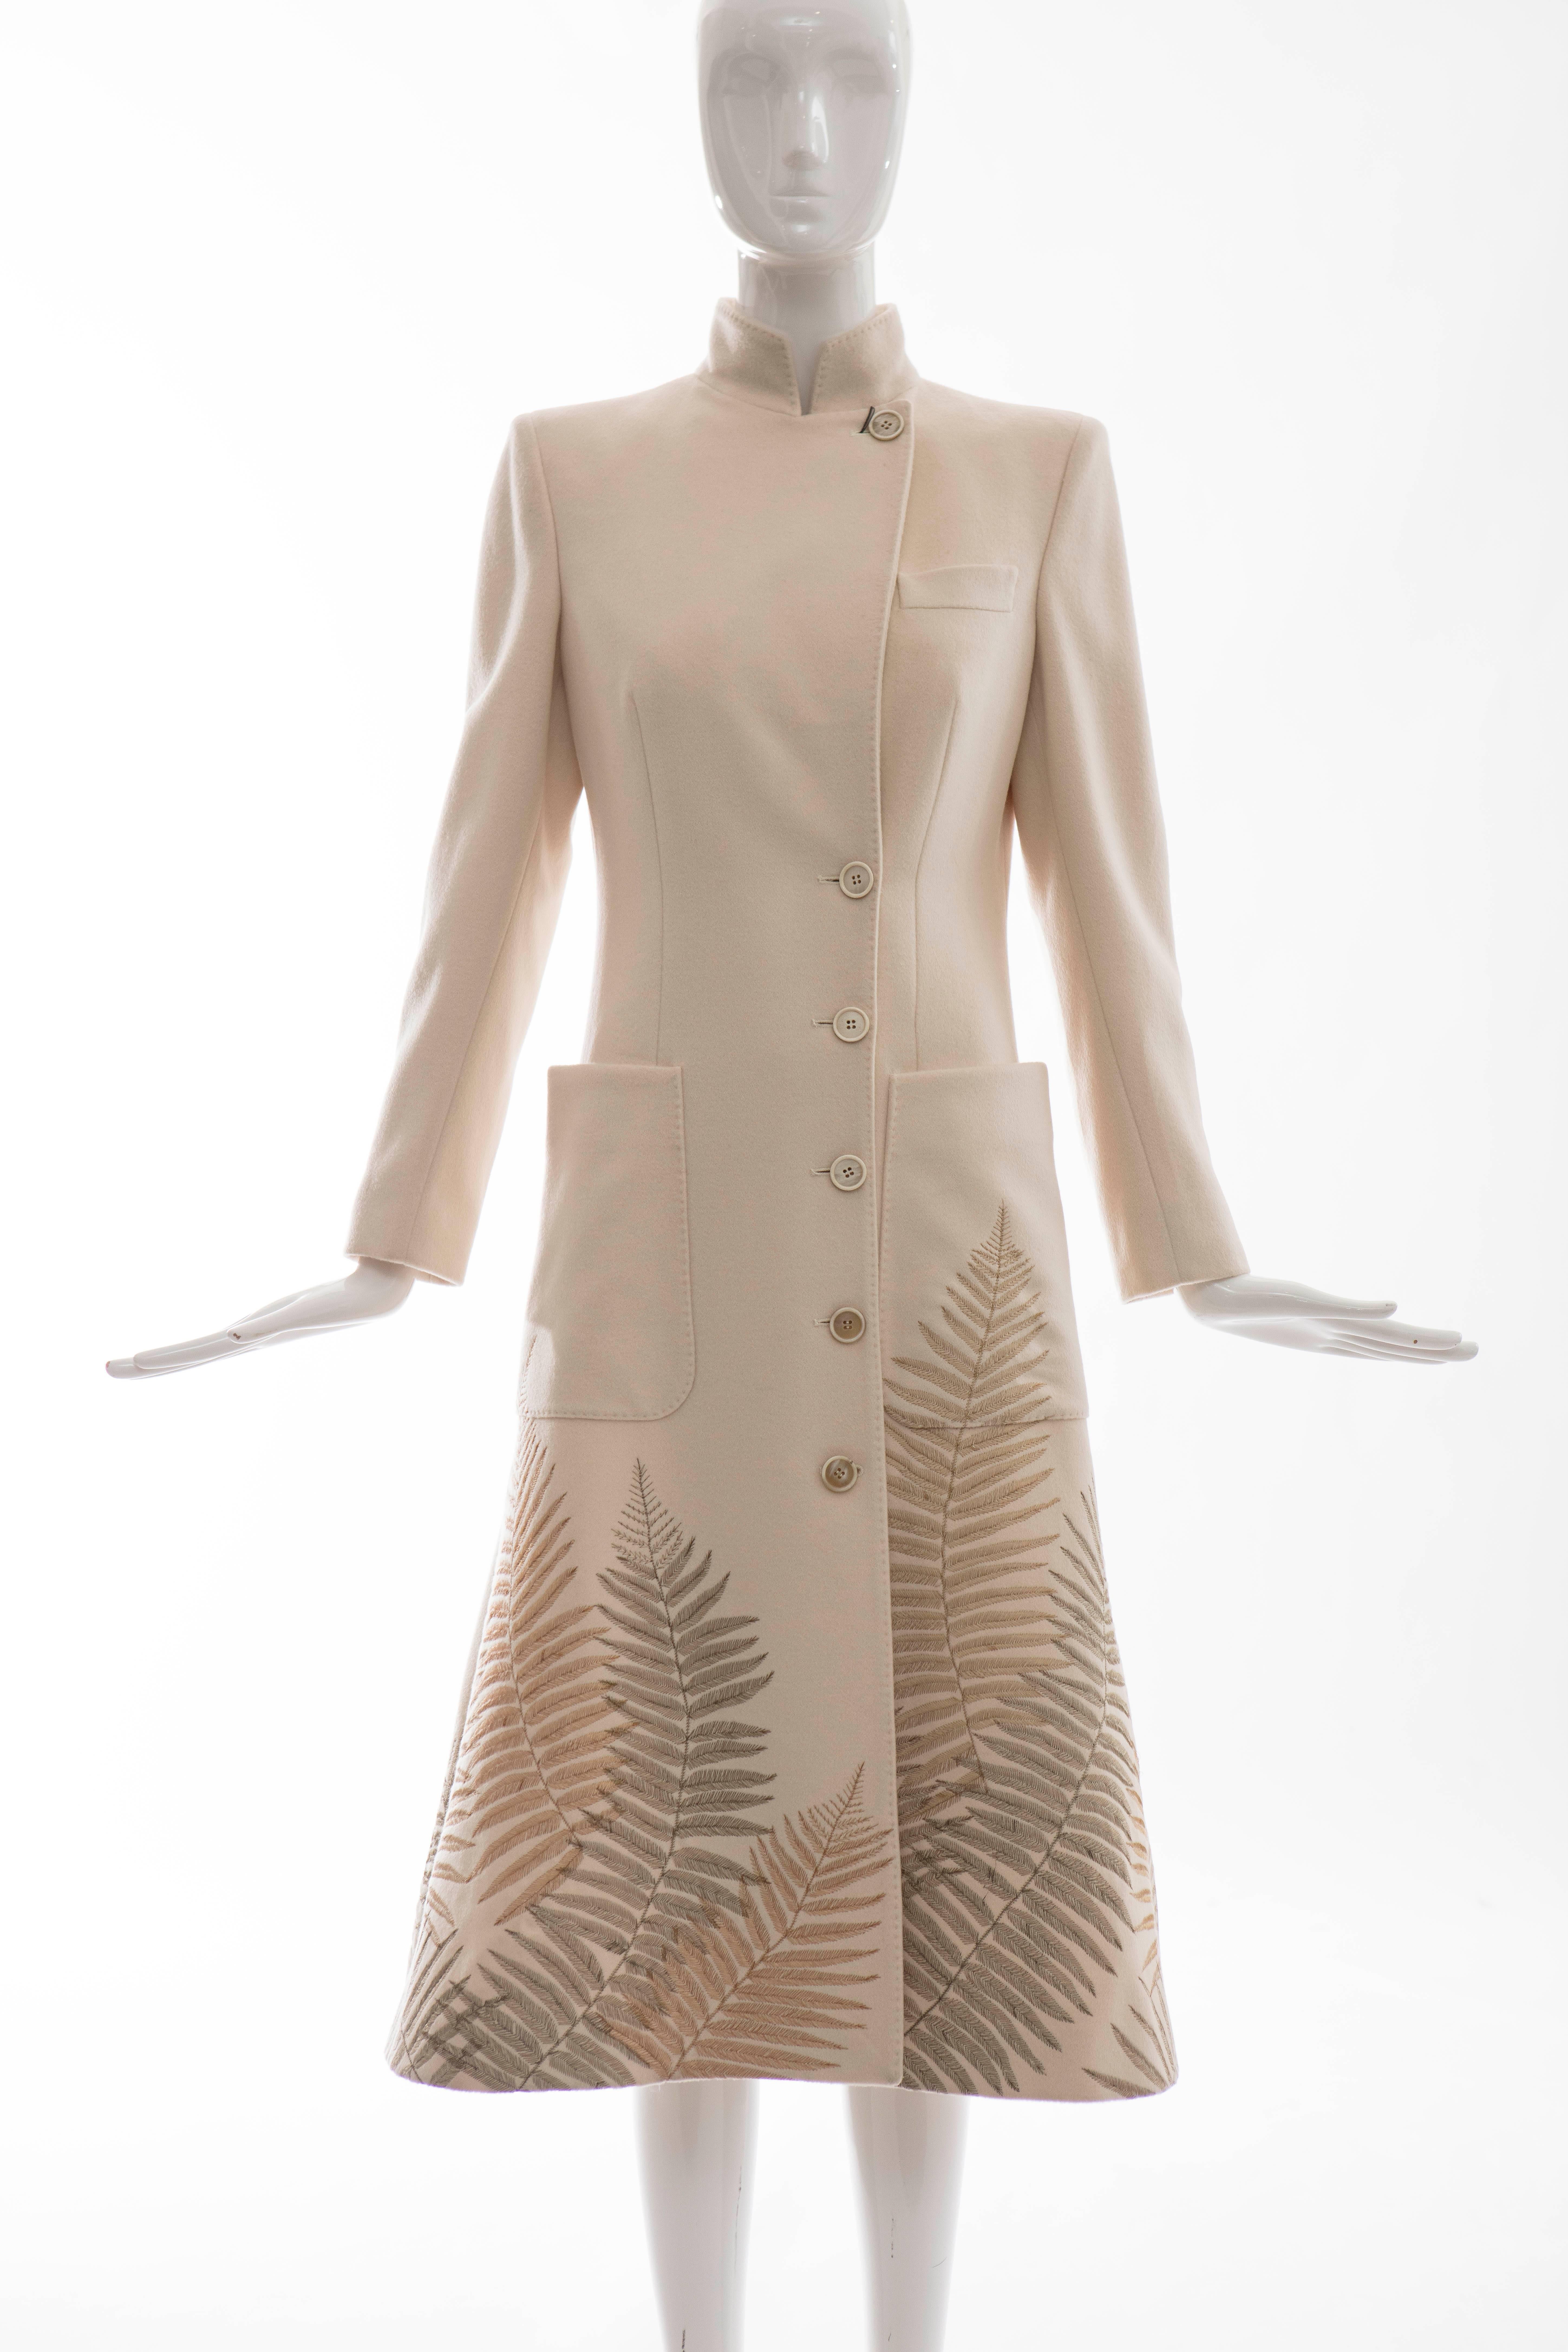 Alexander McQueen, Autumn-Winter 2007 cream cashmere coat with gold-tone fern embroidery, large patch pockets at waist, front button closures and fully lined.

Retail $5325

Bust 36”, Waist 32”, Shoulder 15”, Length 45”

EU.42
US.6